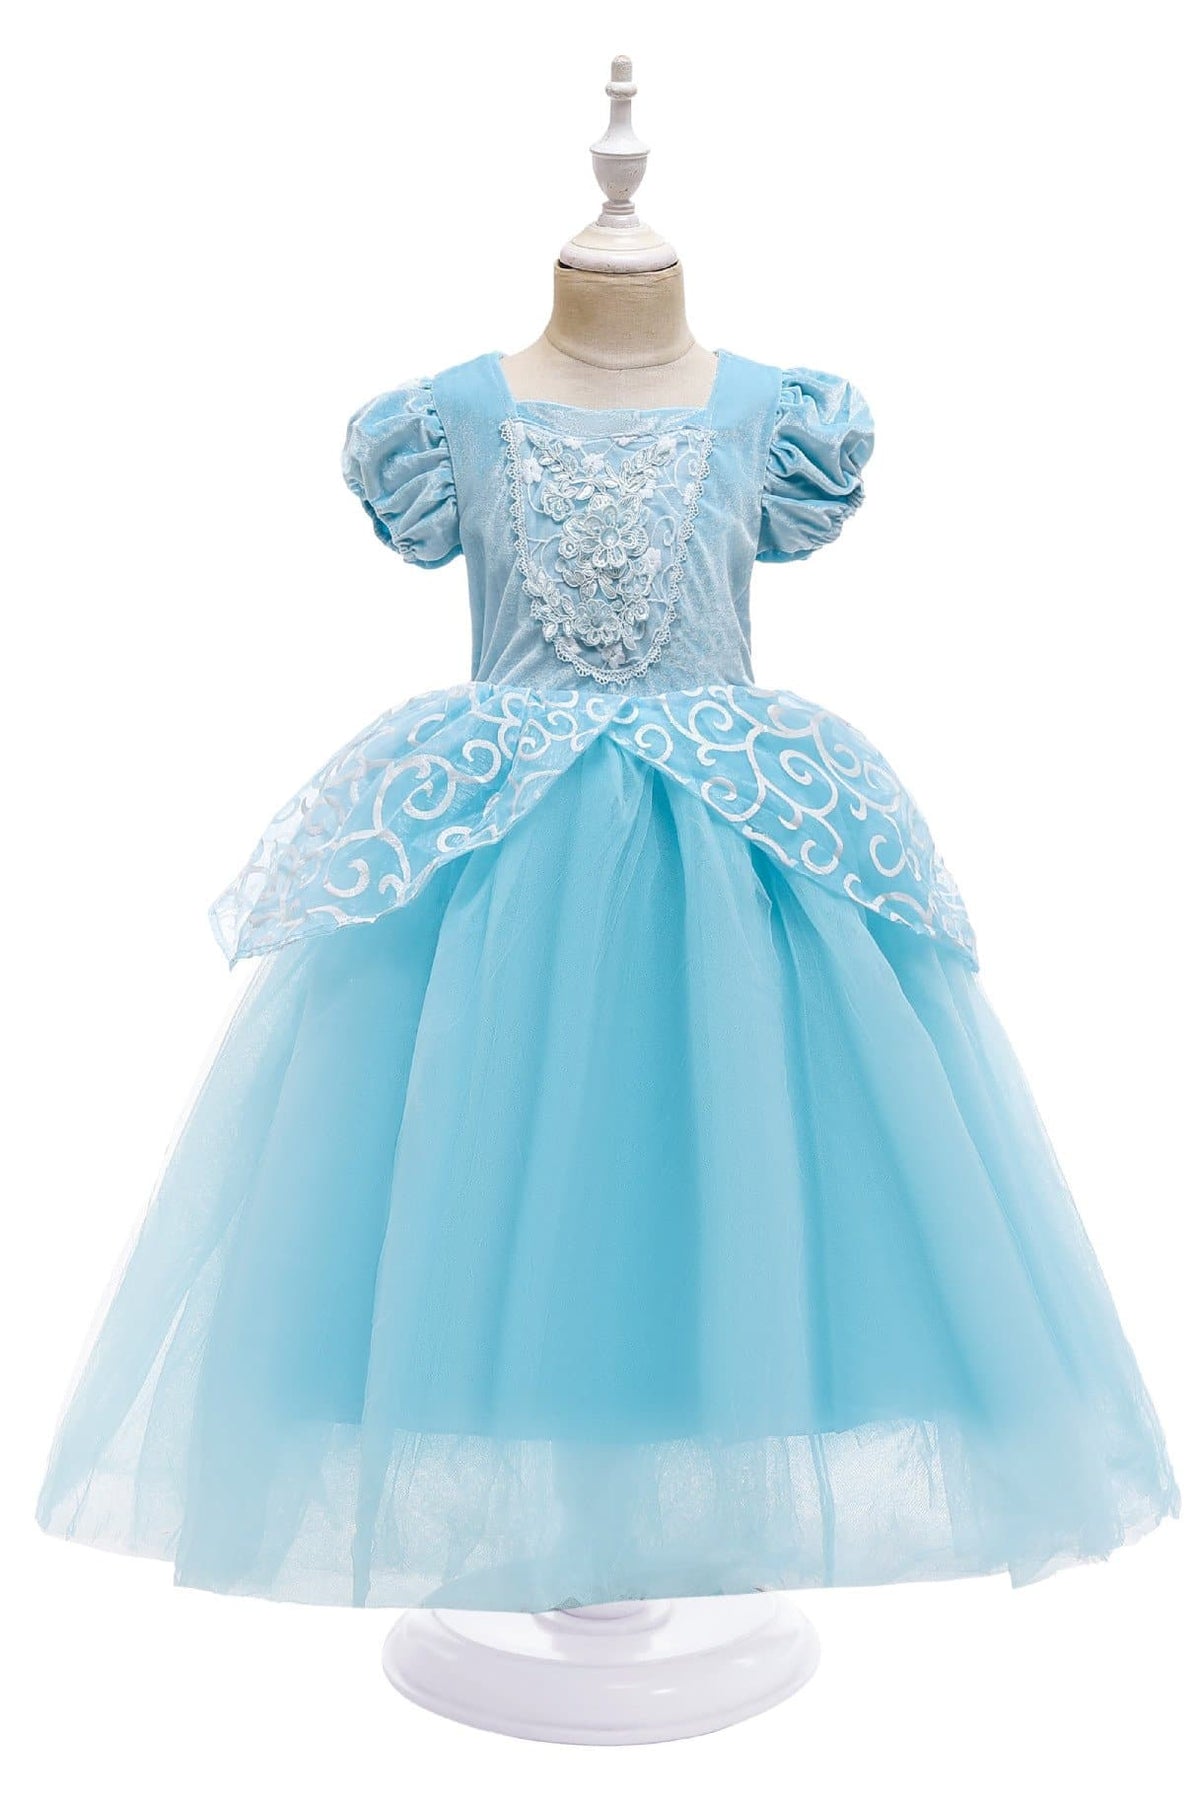 Cinderella Dress Costume For Toddlers Girls – Hallowitch Costumes